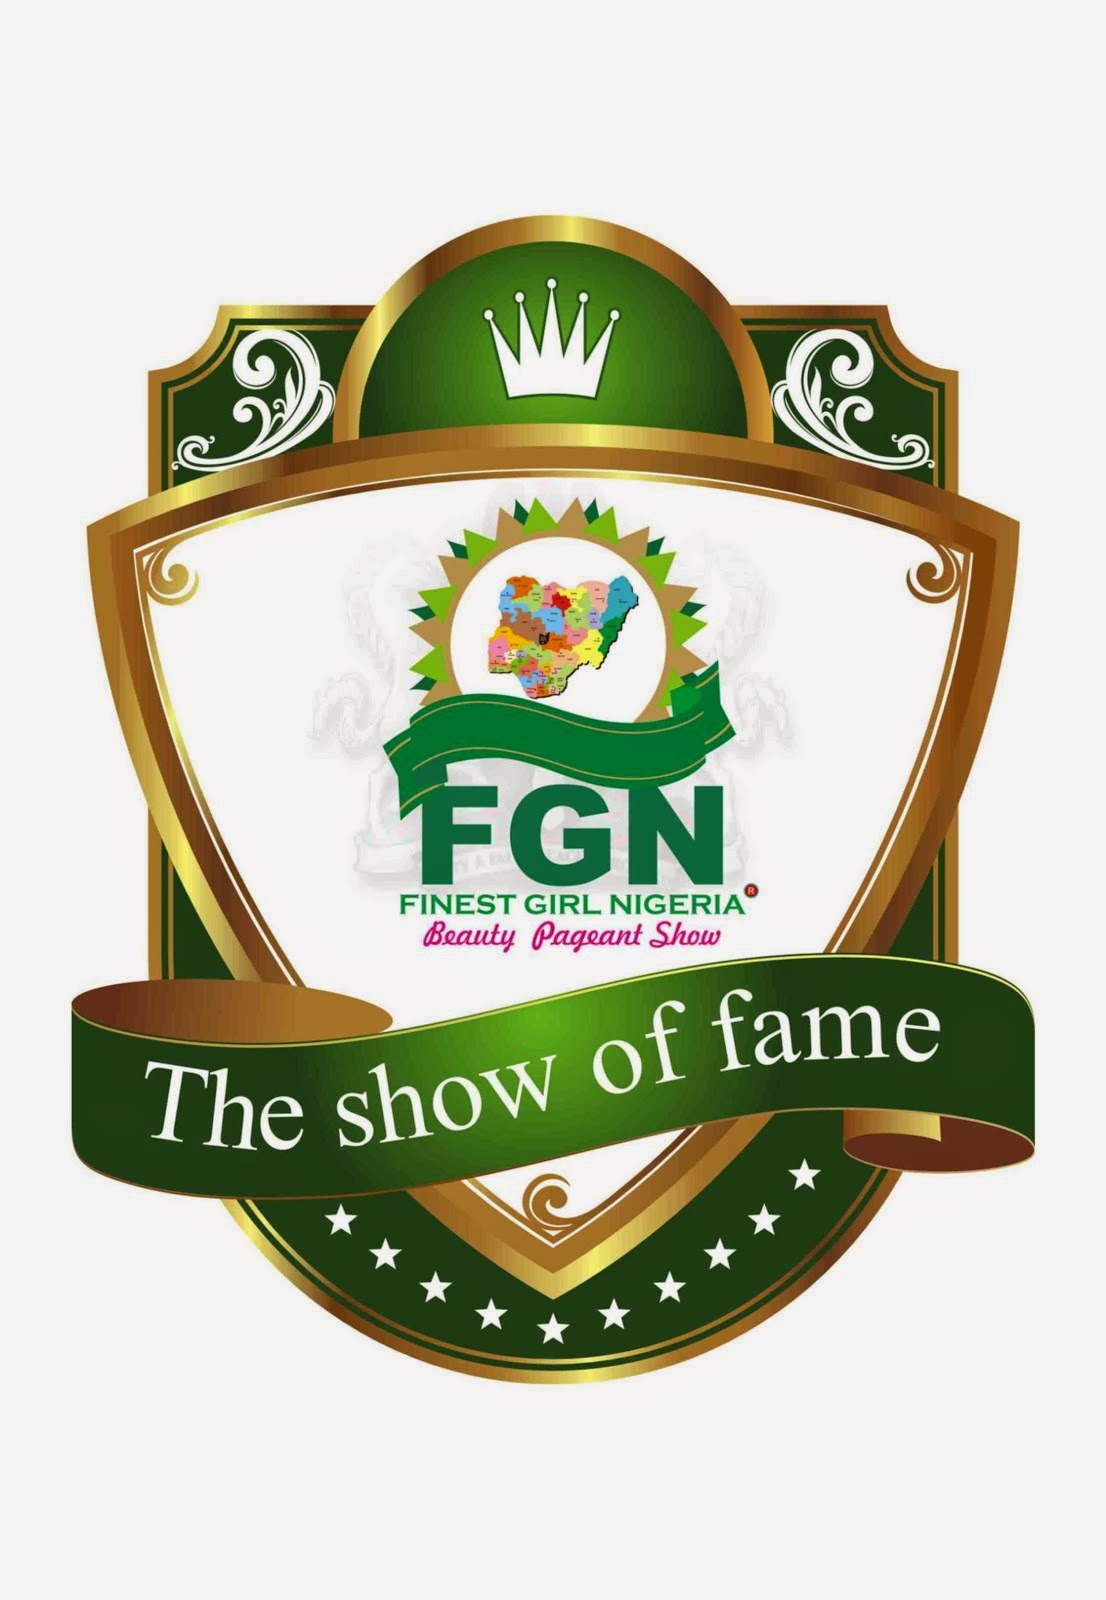 finest girl nigeria 2015 edition holds march 8th at the ICC